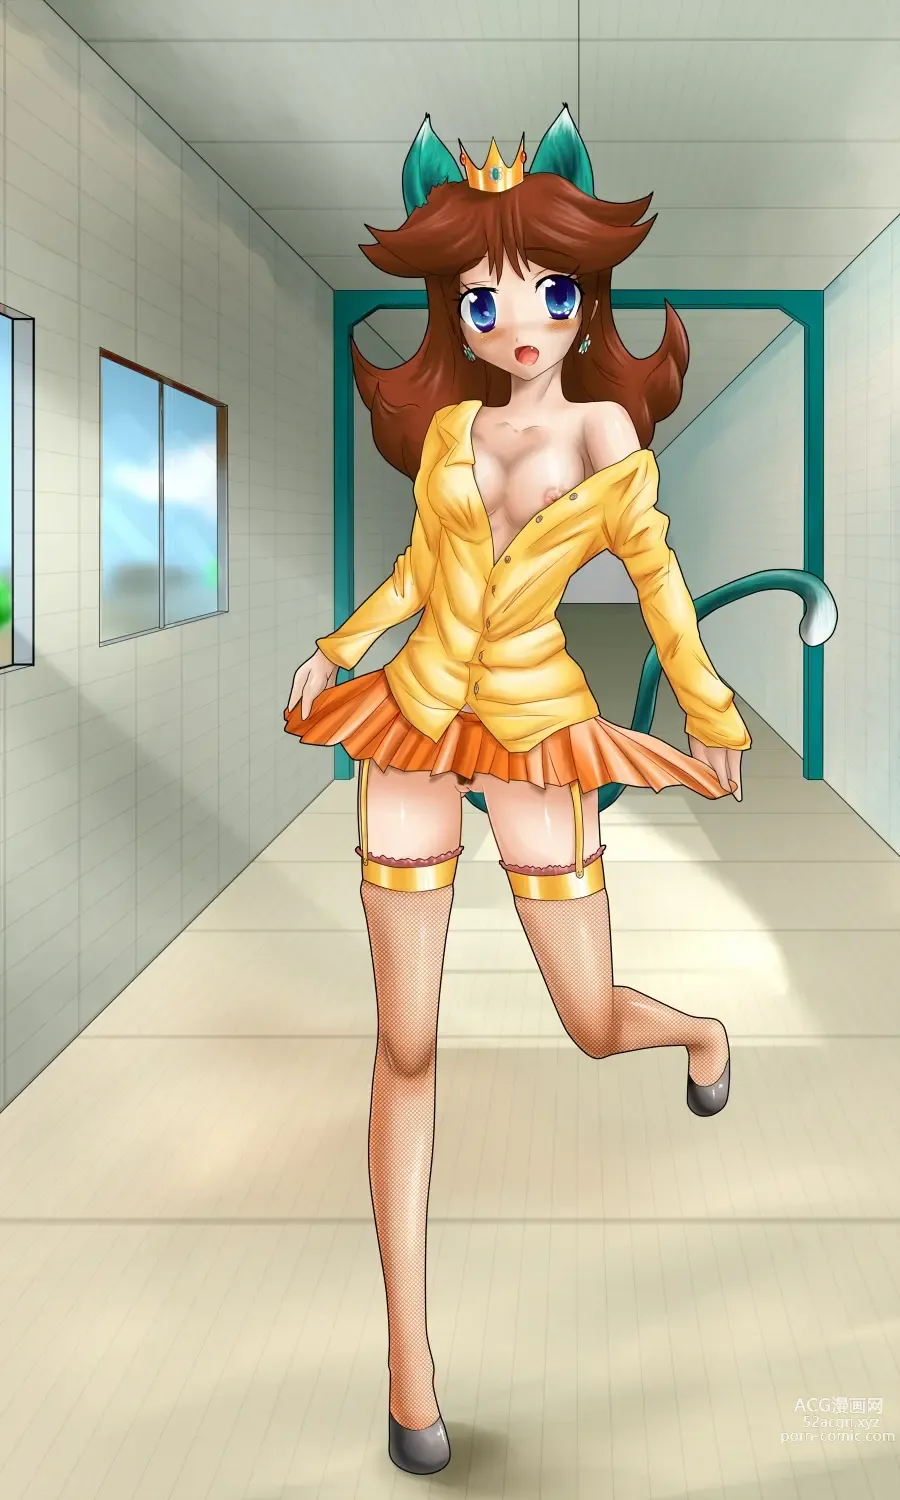 Page 1 of imageset Princess Daisy Collection